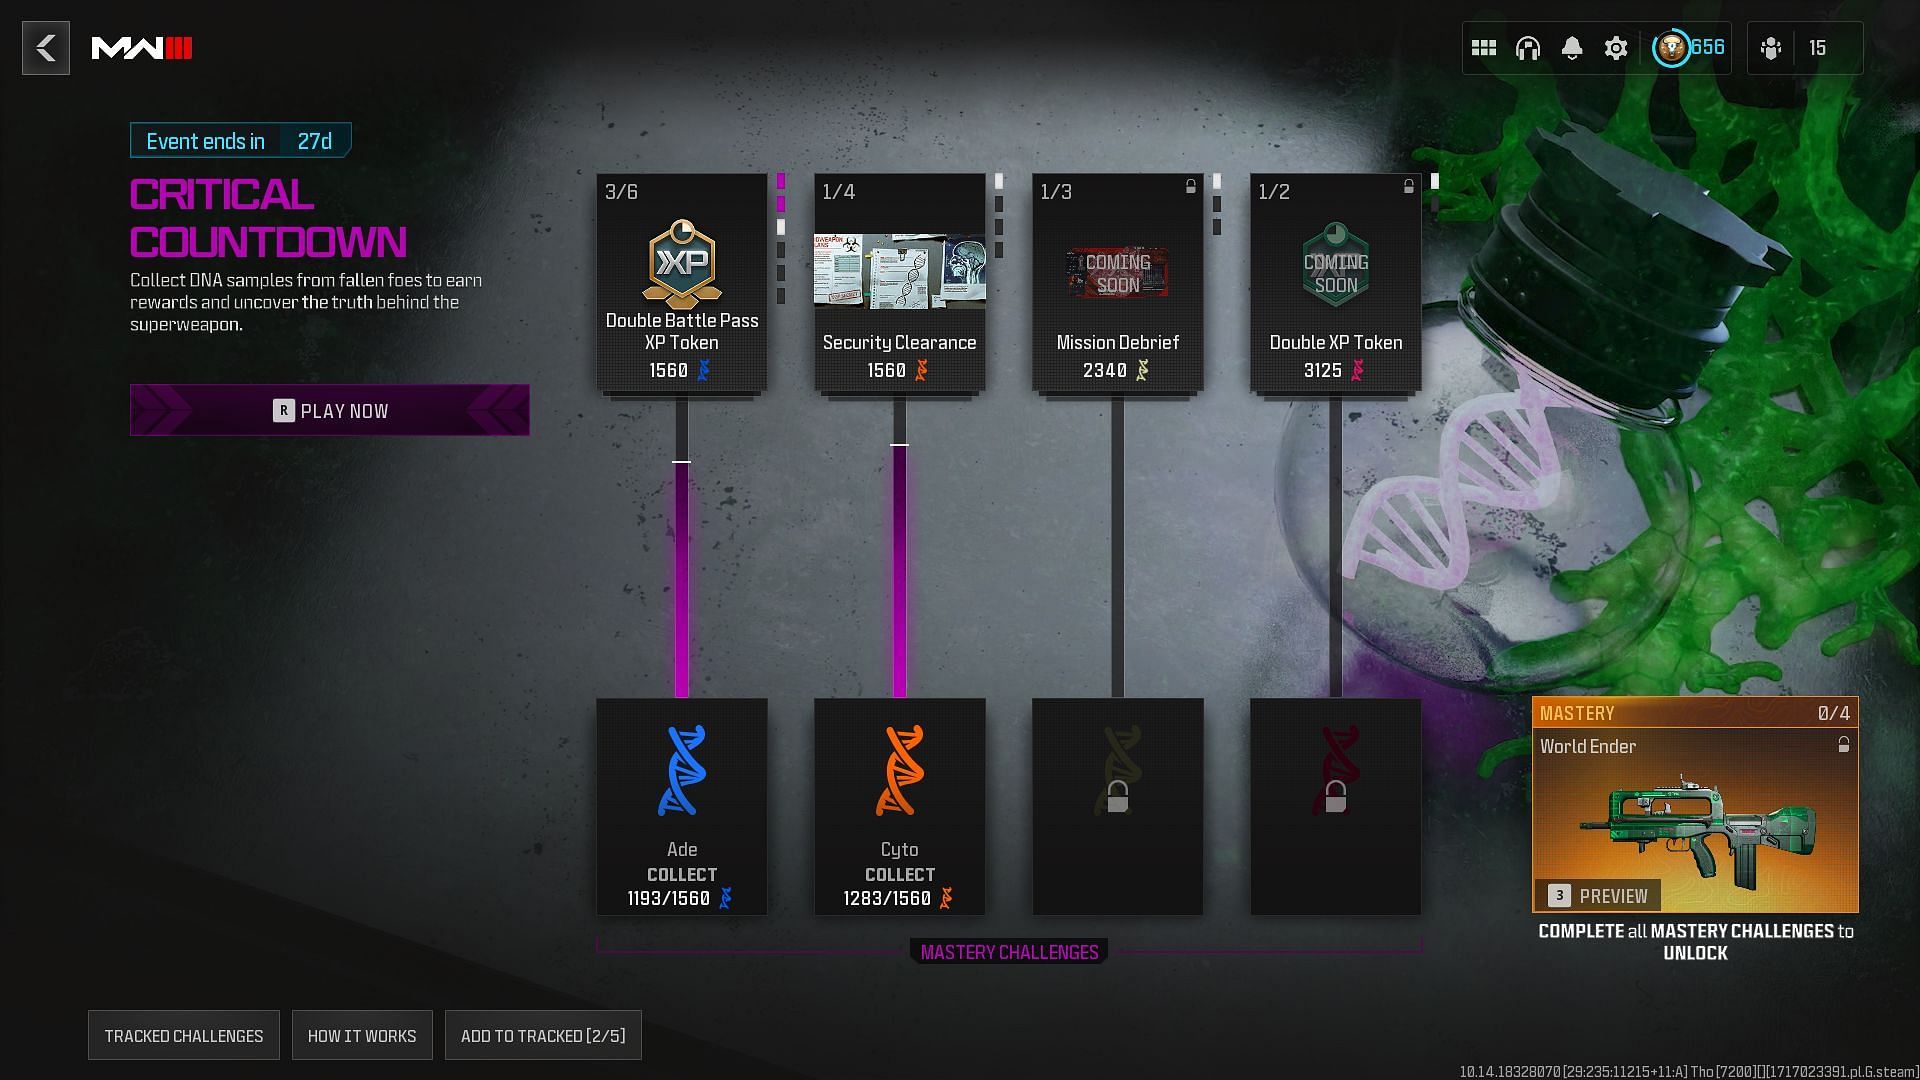 Every reward in the Critical Countdown event of MW3 and Warzone explored. (Image via Activision)